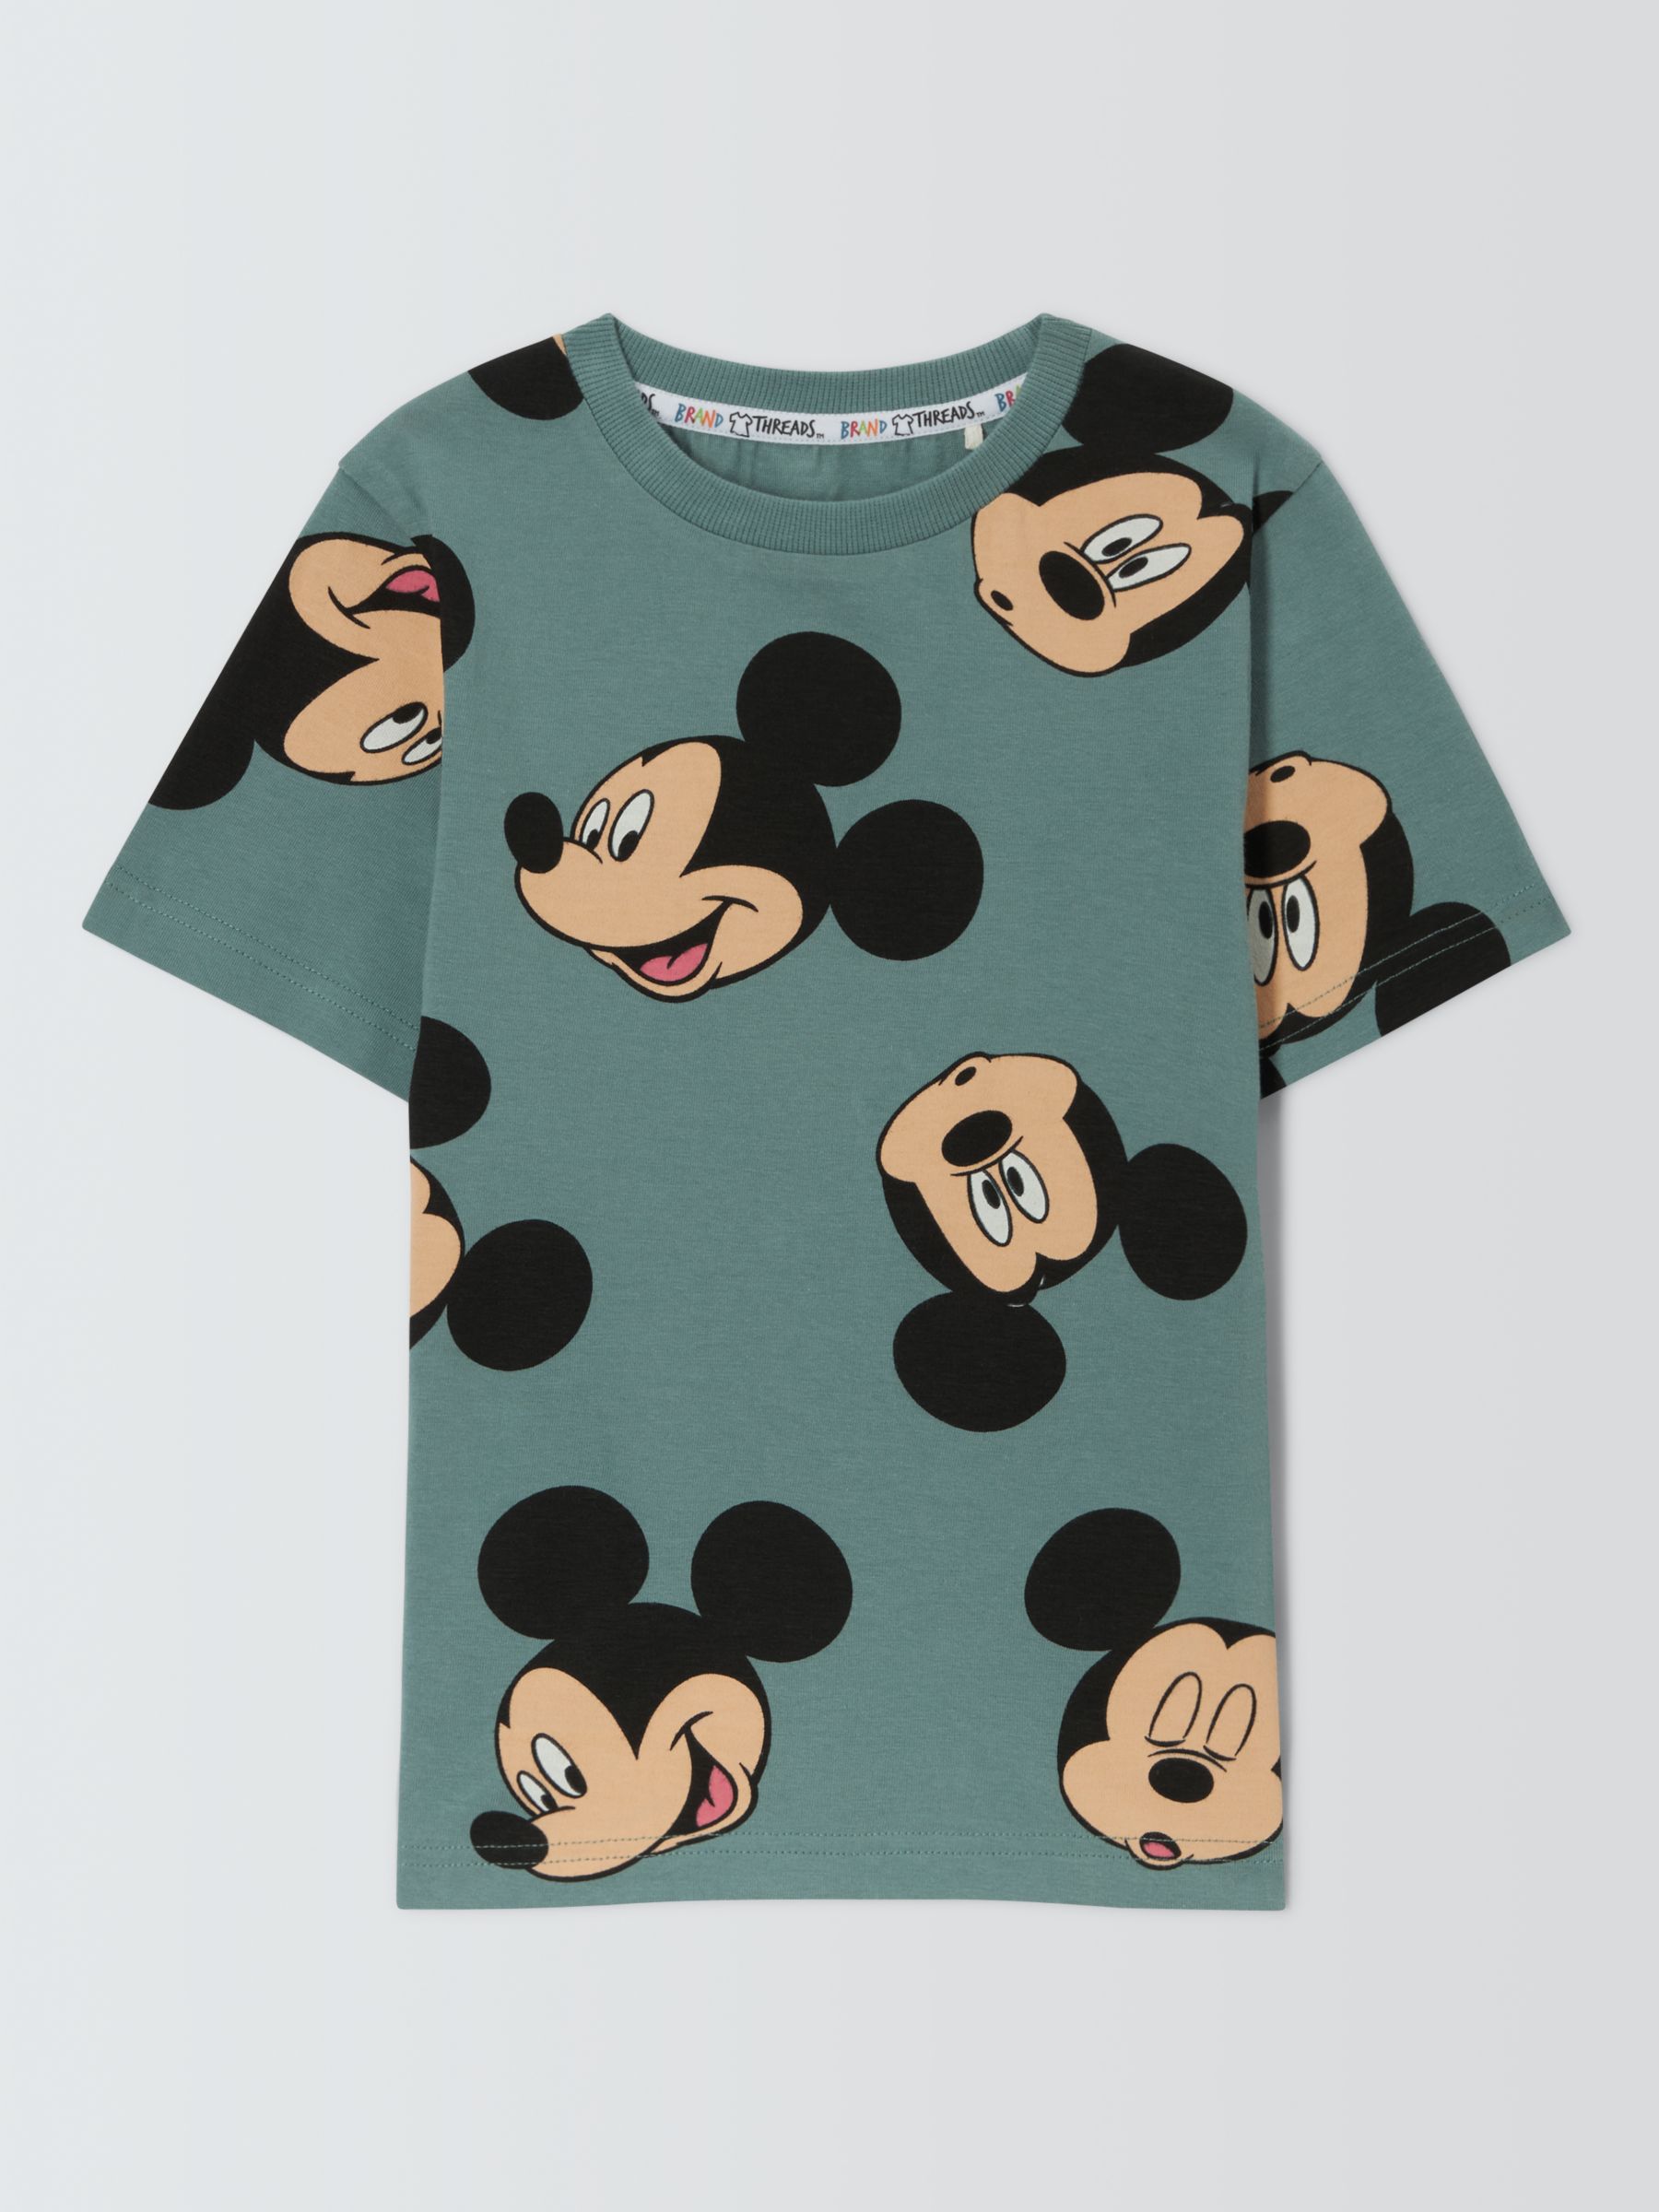 Brand Threads Kids' Disney Mickey Mouse T-Shirt, Green, 4-5 years